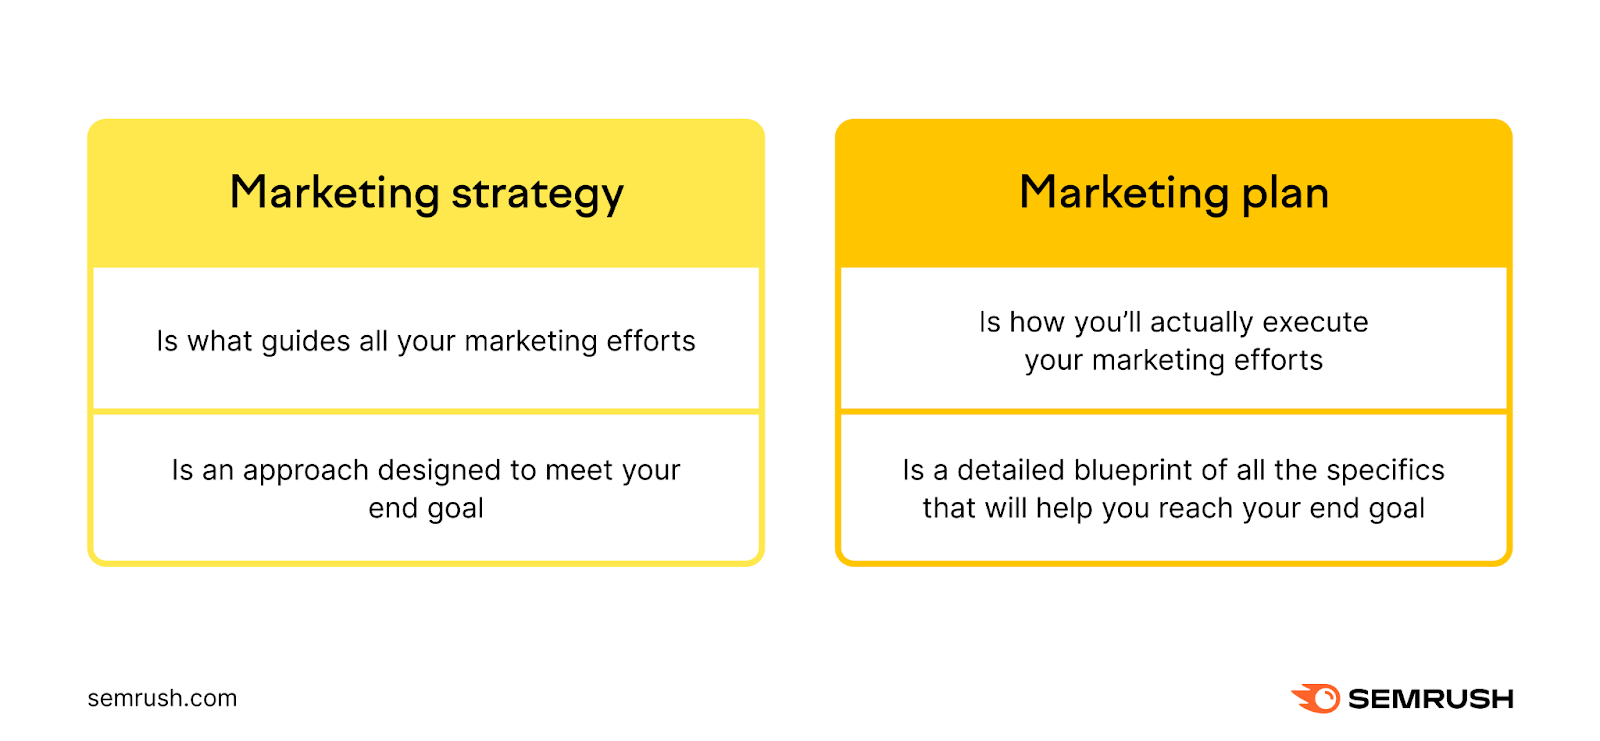 What is a Marketing Plan & How to Write One [+Examples]